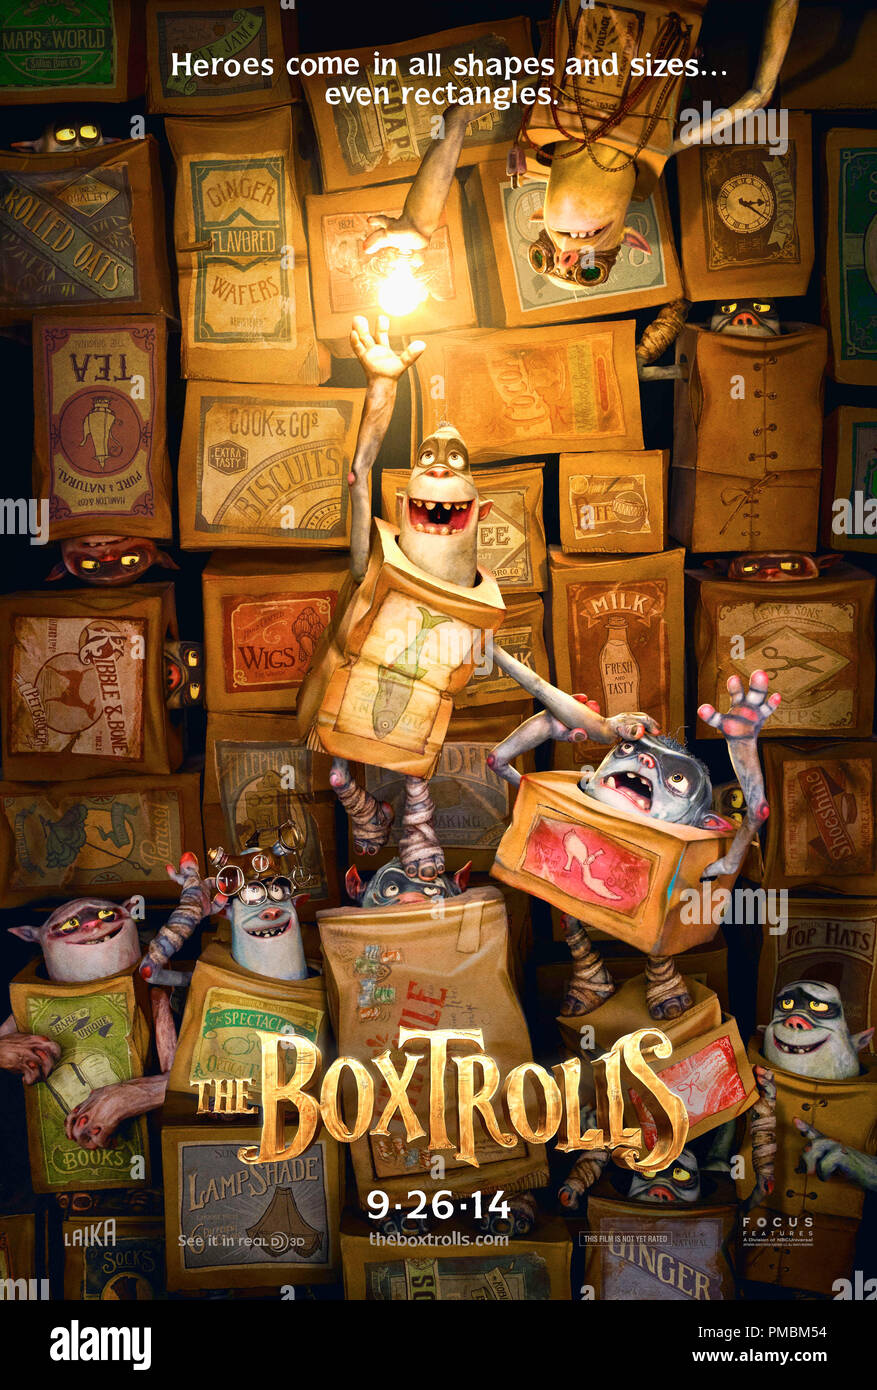 Focus Features' family event movie THE BOXTROLLS - Poster Stock Photo